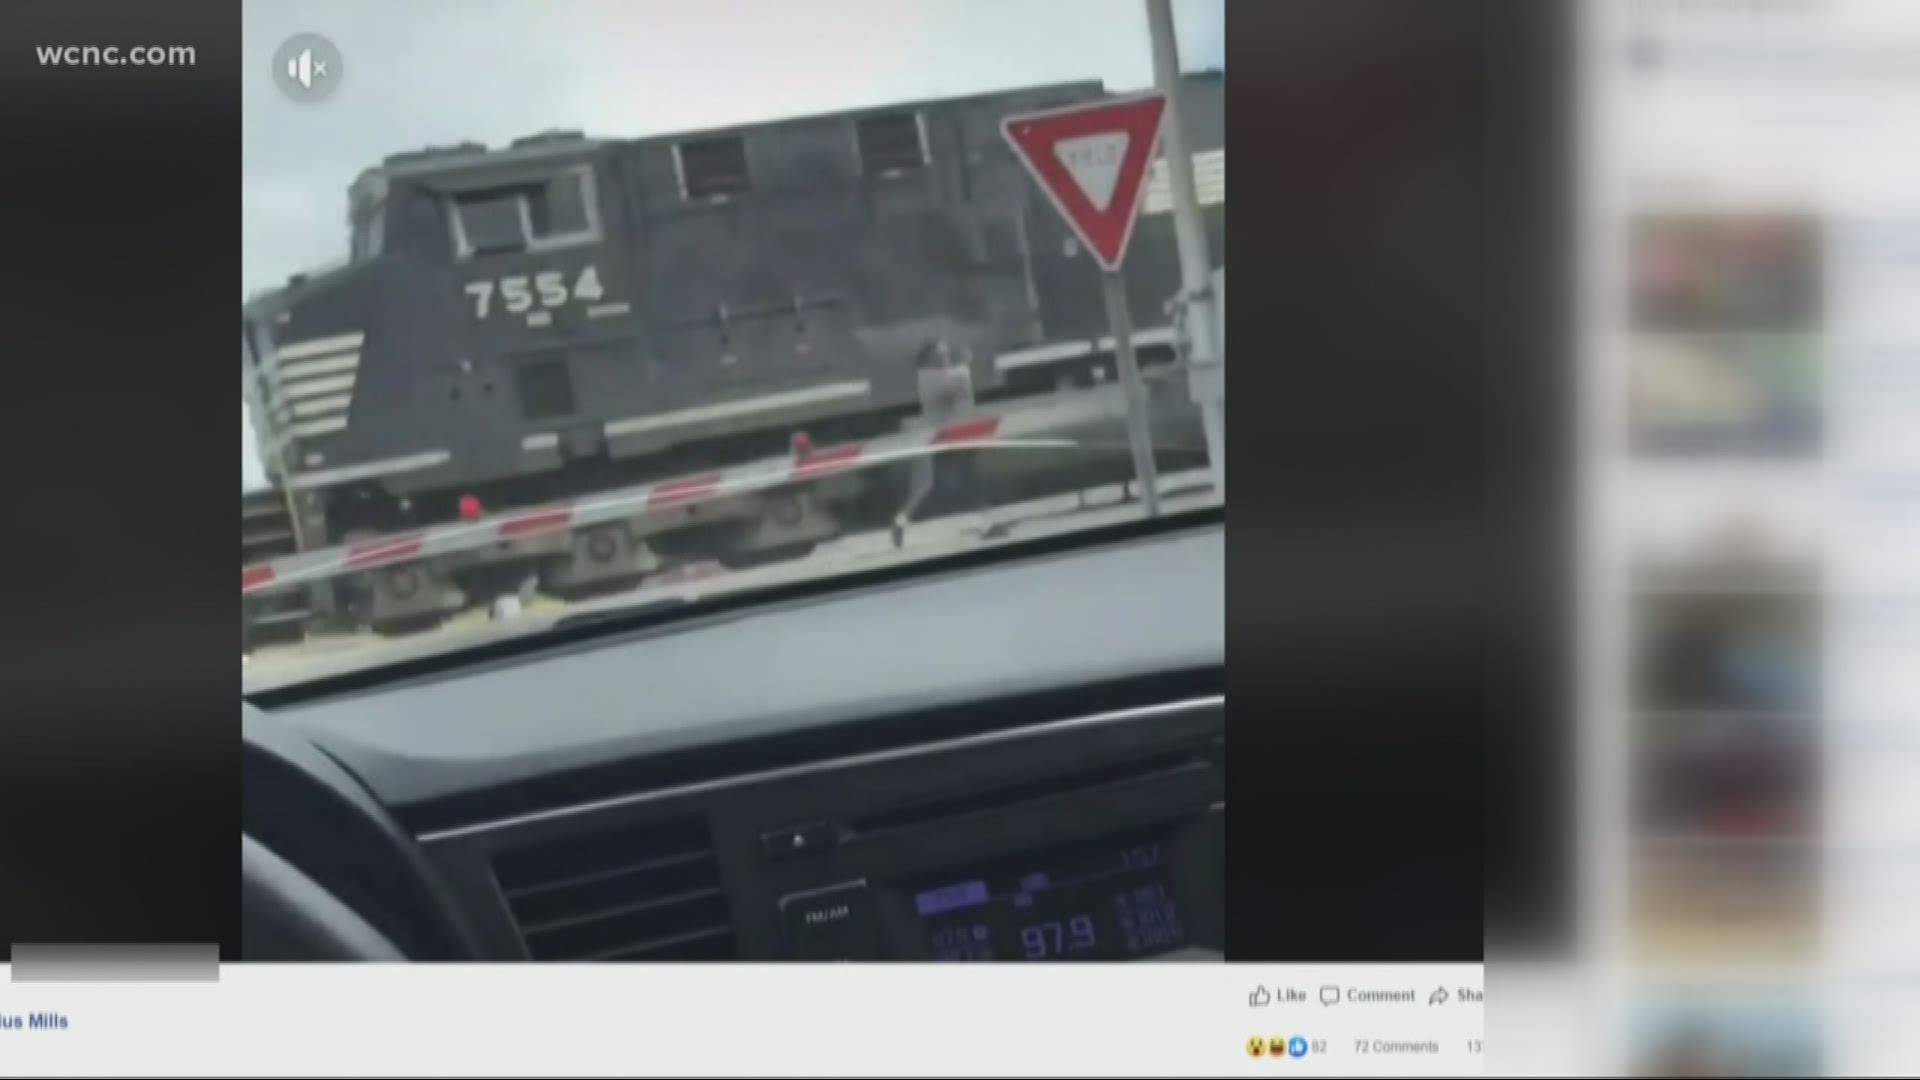 In a viral Facebook video, a driver recorded a woman racing across the railroad tracks, barely making it across less than a second before a train passes through.